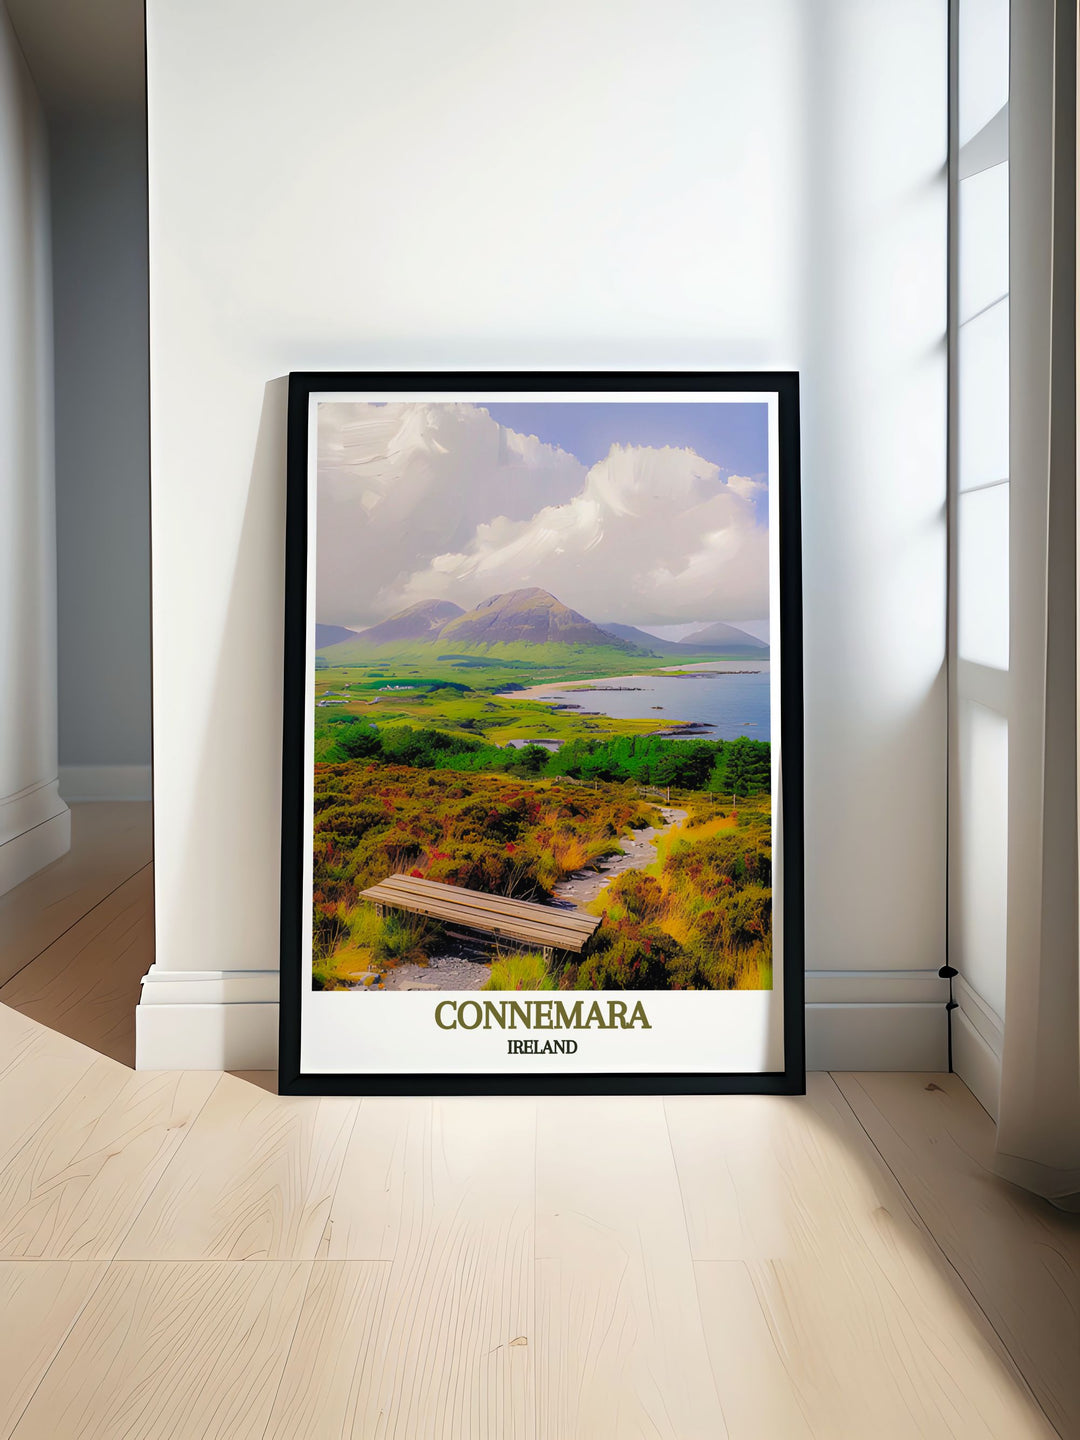 Admire the cultural richness of Connemara, Ireland, where local festivals, traditional music, and Gaelic speaking communities keep the regions heritage alive, offering visitors a vibrant cultural experience alongside its natural beauty.